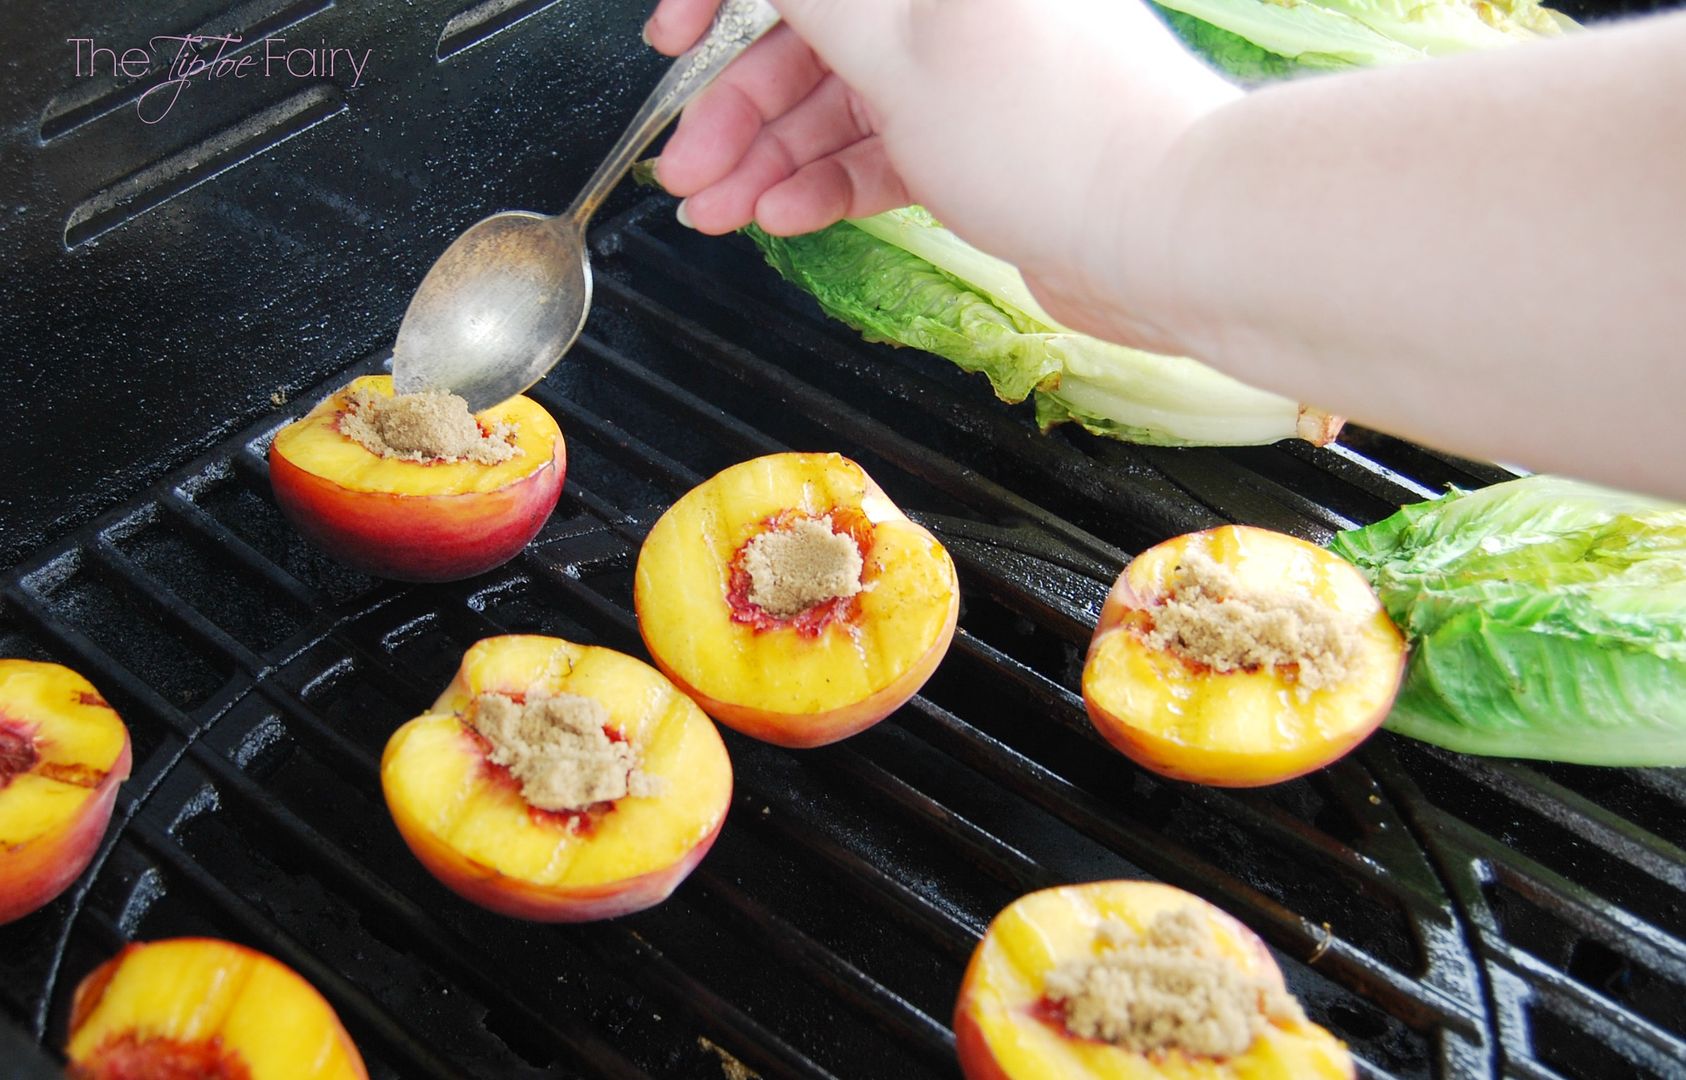 Grill Your Meal from Start to Finish | The TipToe Fairy #FoodMadeSimple #shop #grilling #grilledpizza #grilledromaine #grilledpeaches